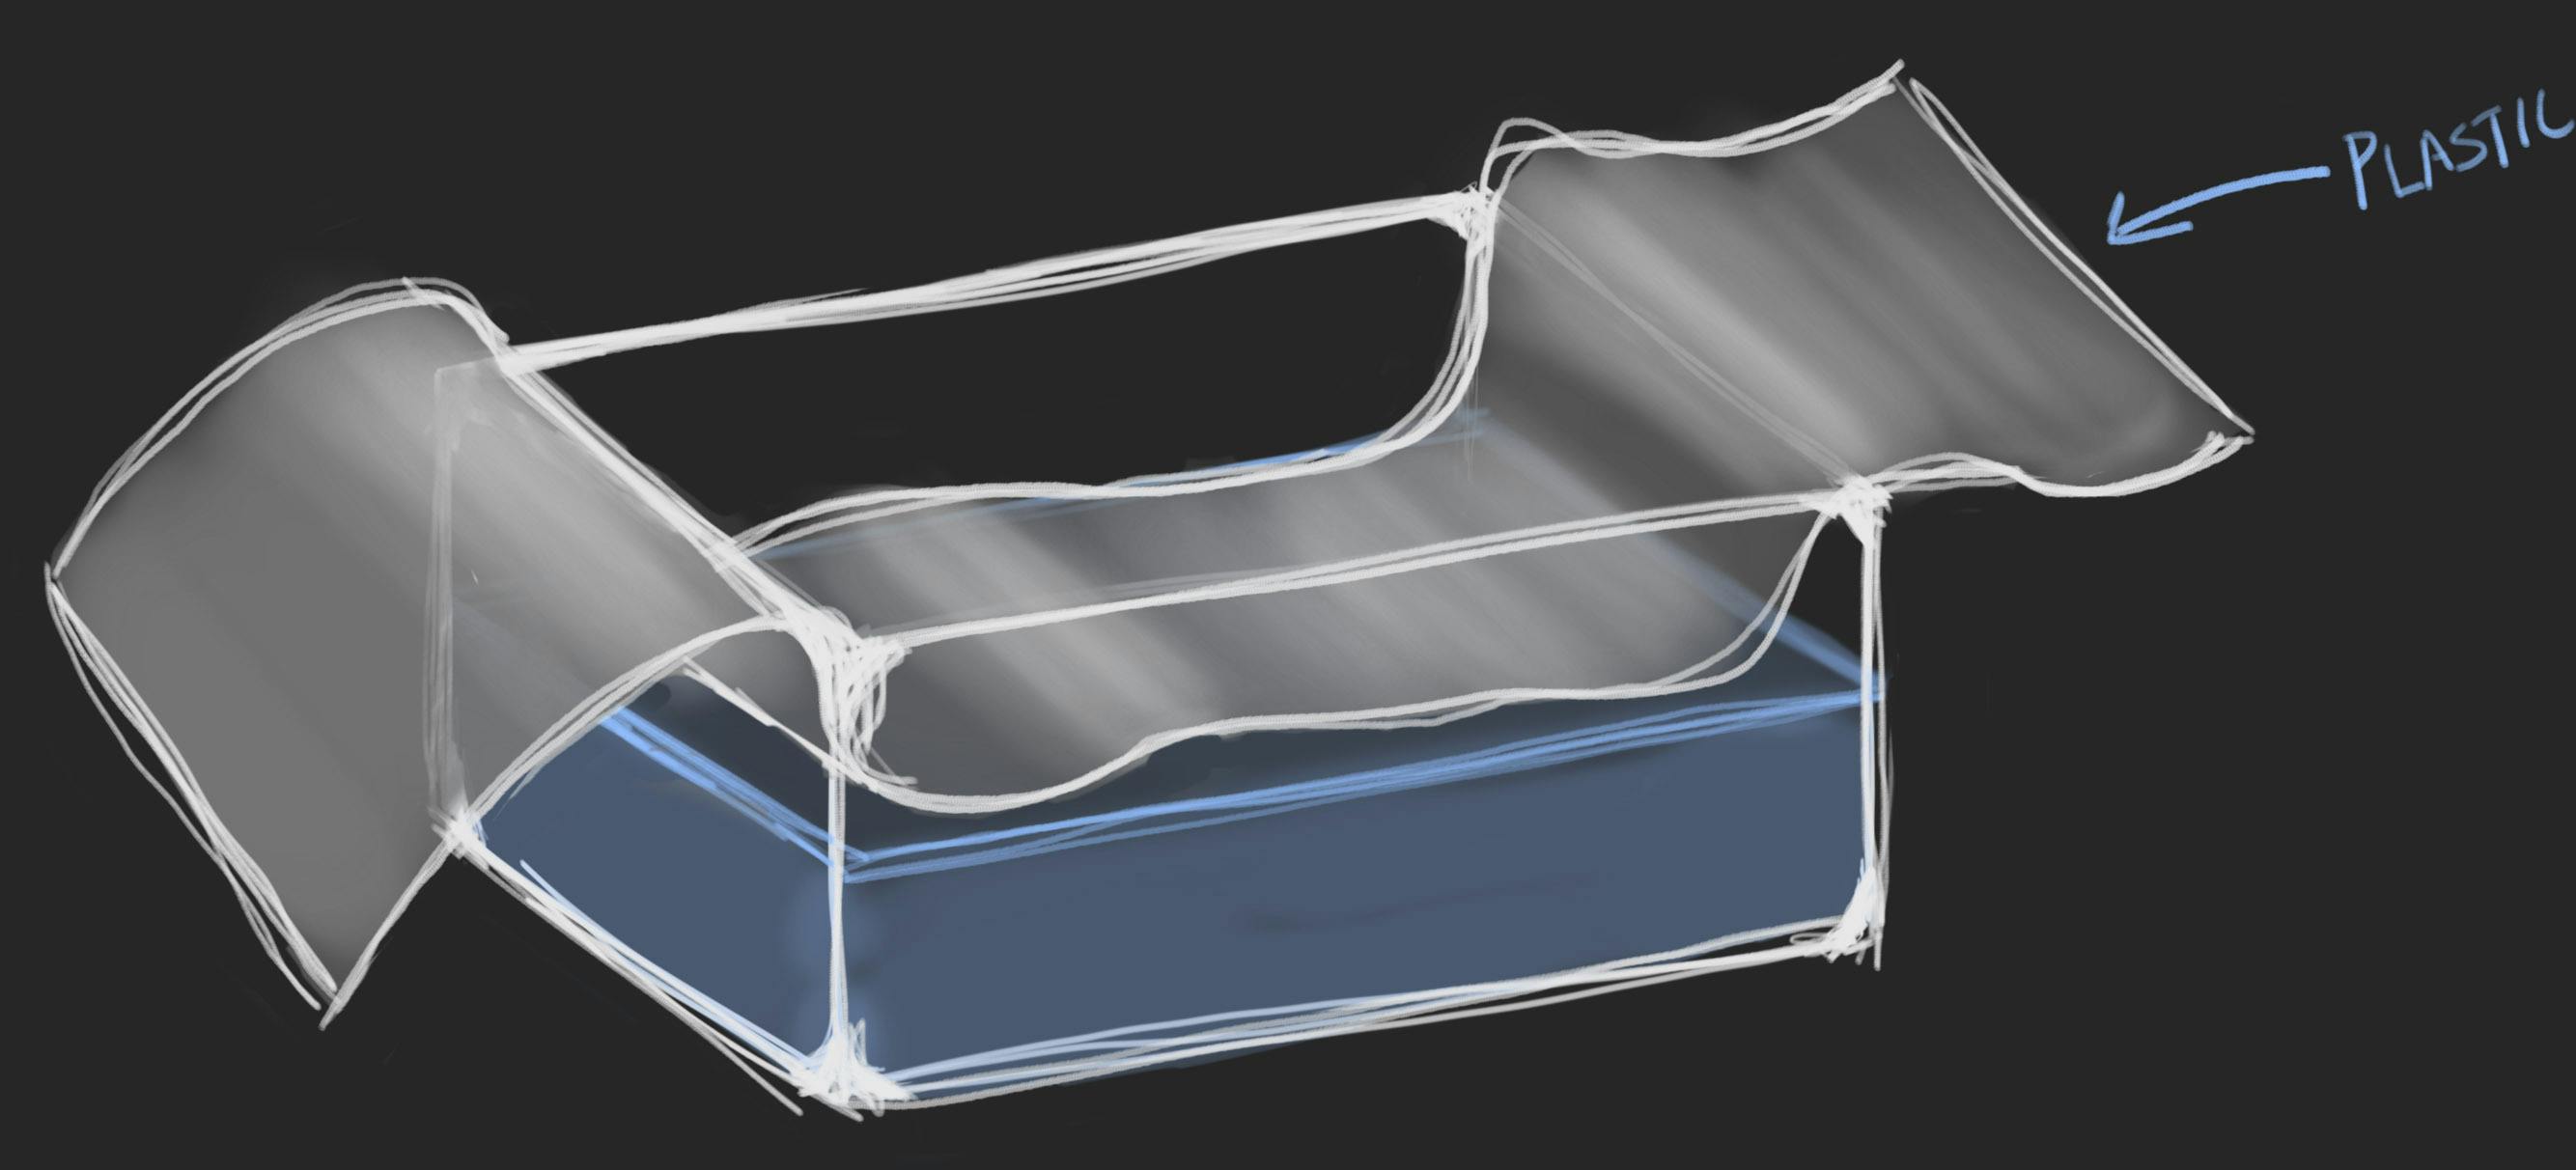 a drawing of an aquarium filled half way with water and a sheet of plastic draped over the top